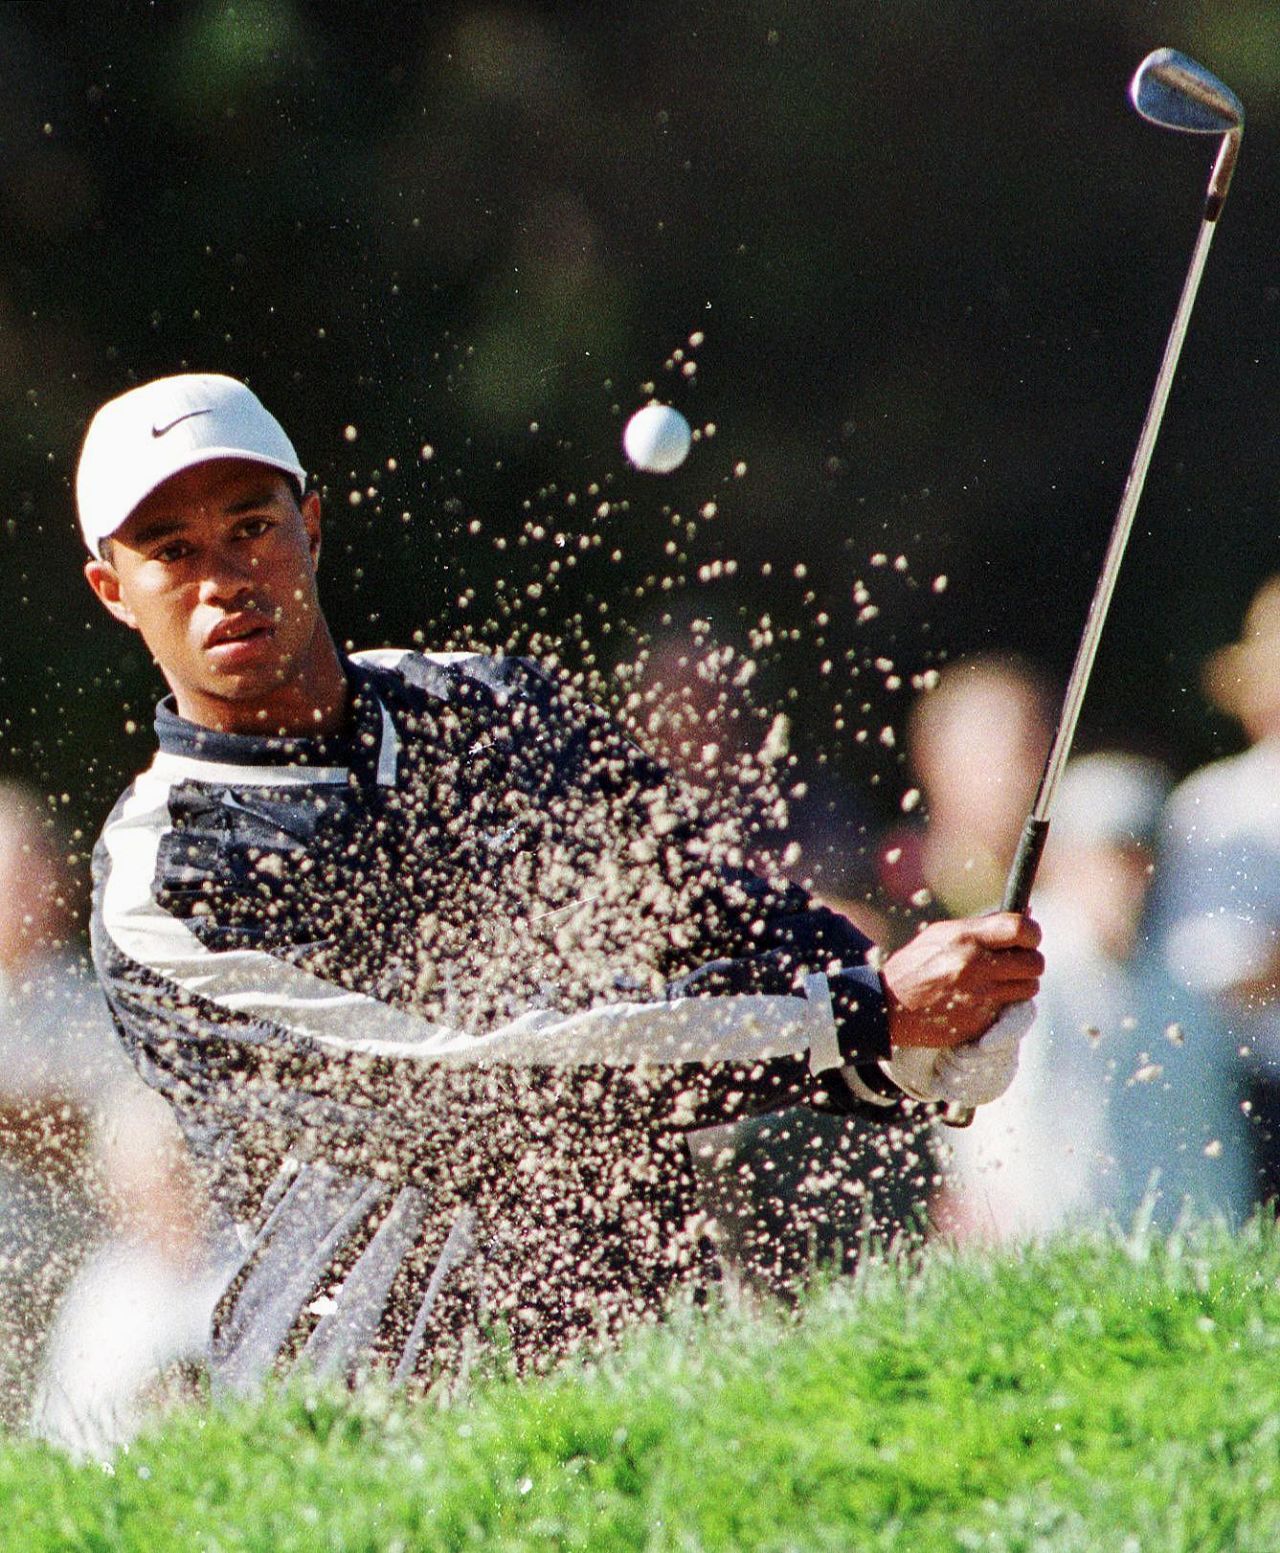 Next week's U.S. Open will be played at San Francisco's Olympic Club, where a youthful Woods tied for 18th when the golf season's second major was played there in 1998.